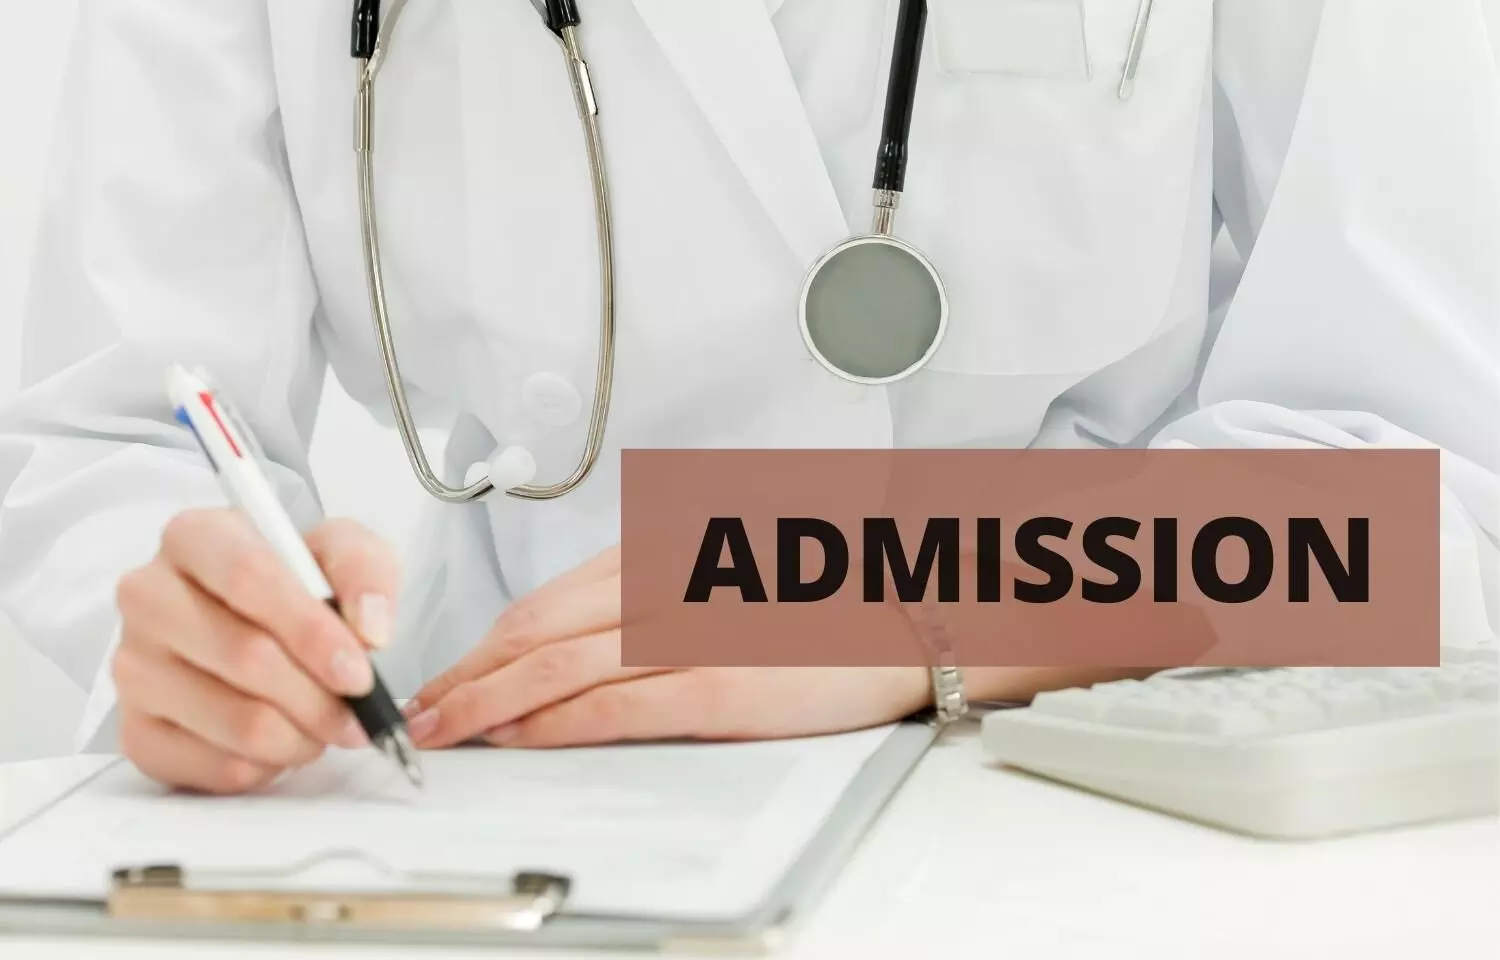 DM, MCh at AIIMS Raipur: Check out feeder qualifications, exam scheme, fee, all admission details here, Apply by February 15